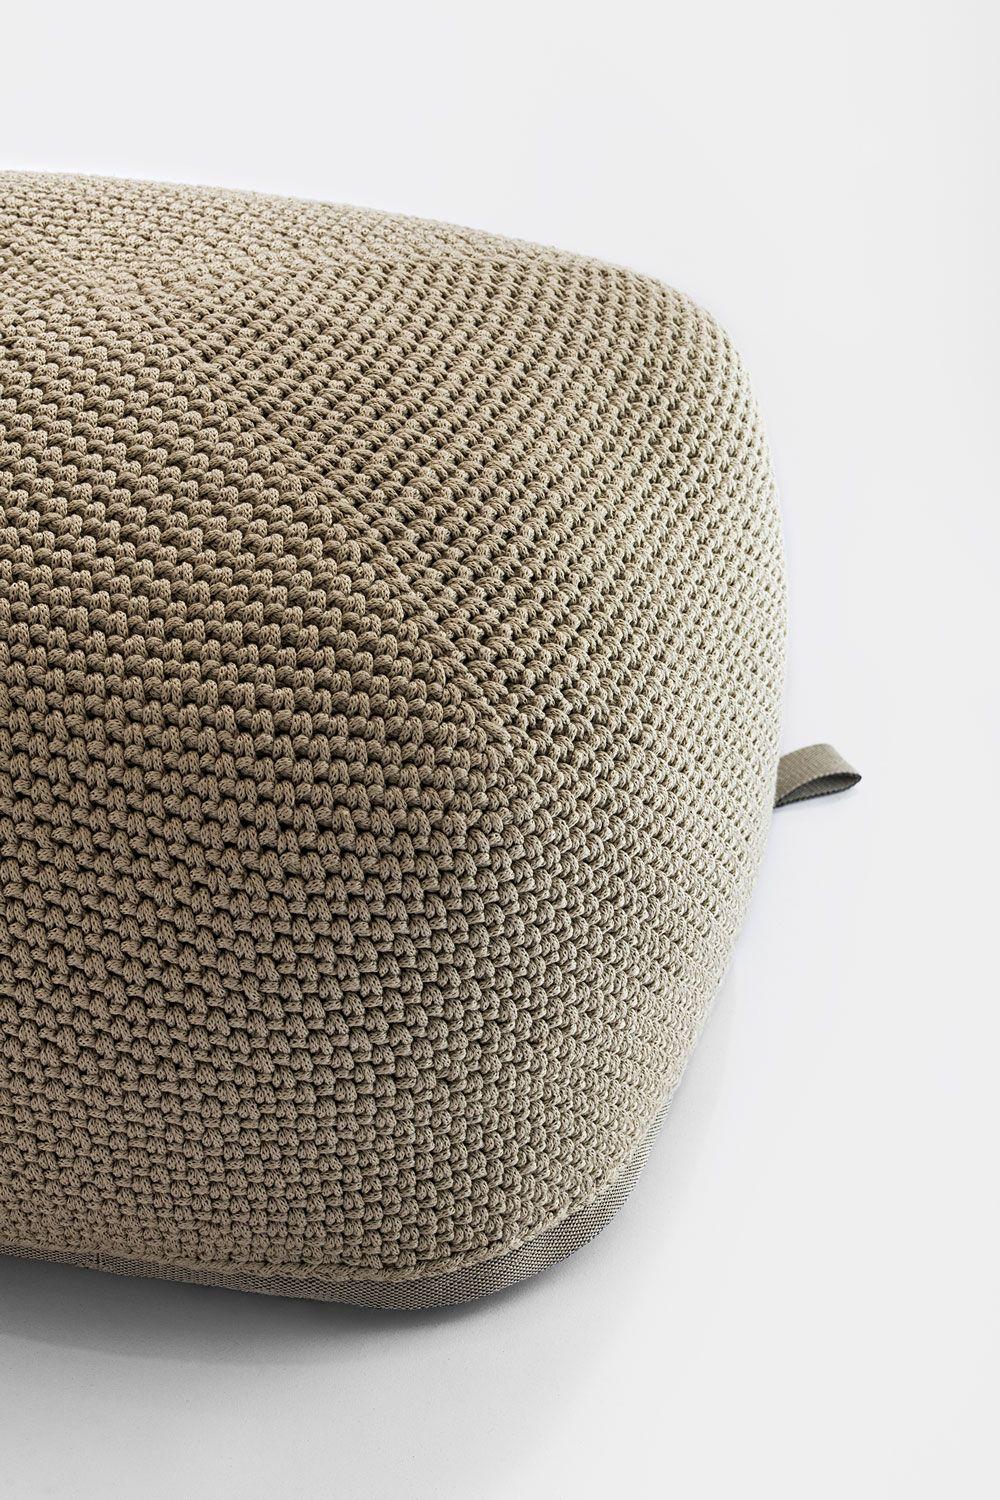 This designer beanbag cushion is a cube-shaped comfy seating solution. This cushion is handwoven from UV protected acrylic and polyester webbing by artisans in Israel. It can be a part of your permanent living room layout or a carry out object you